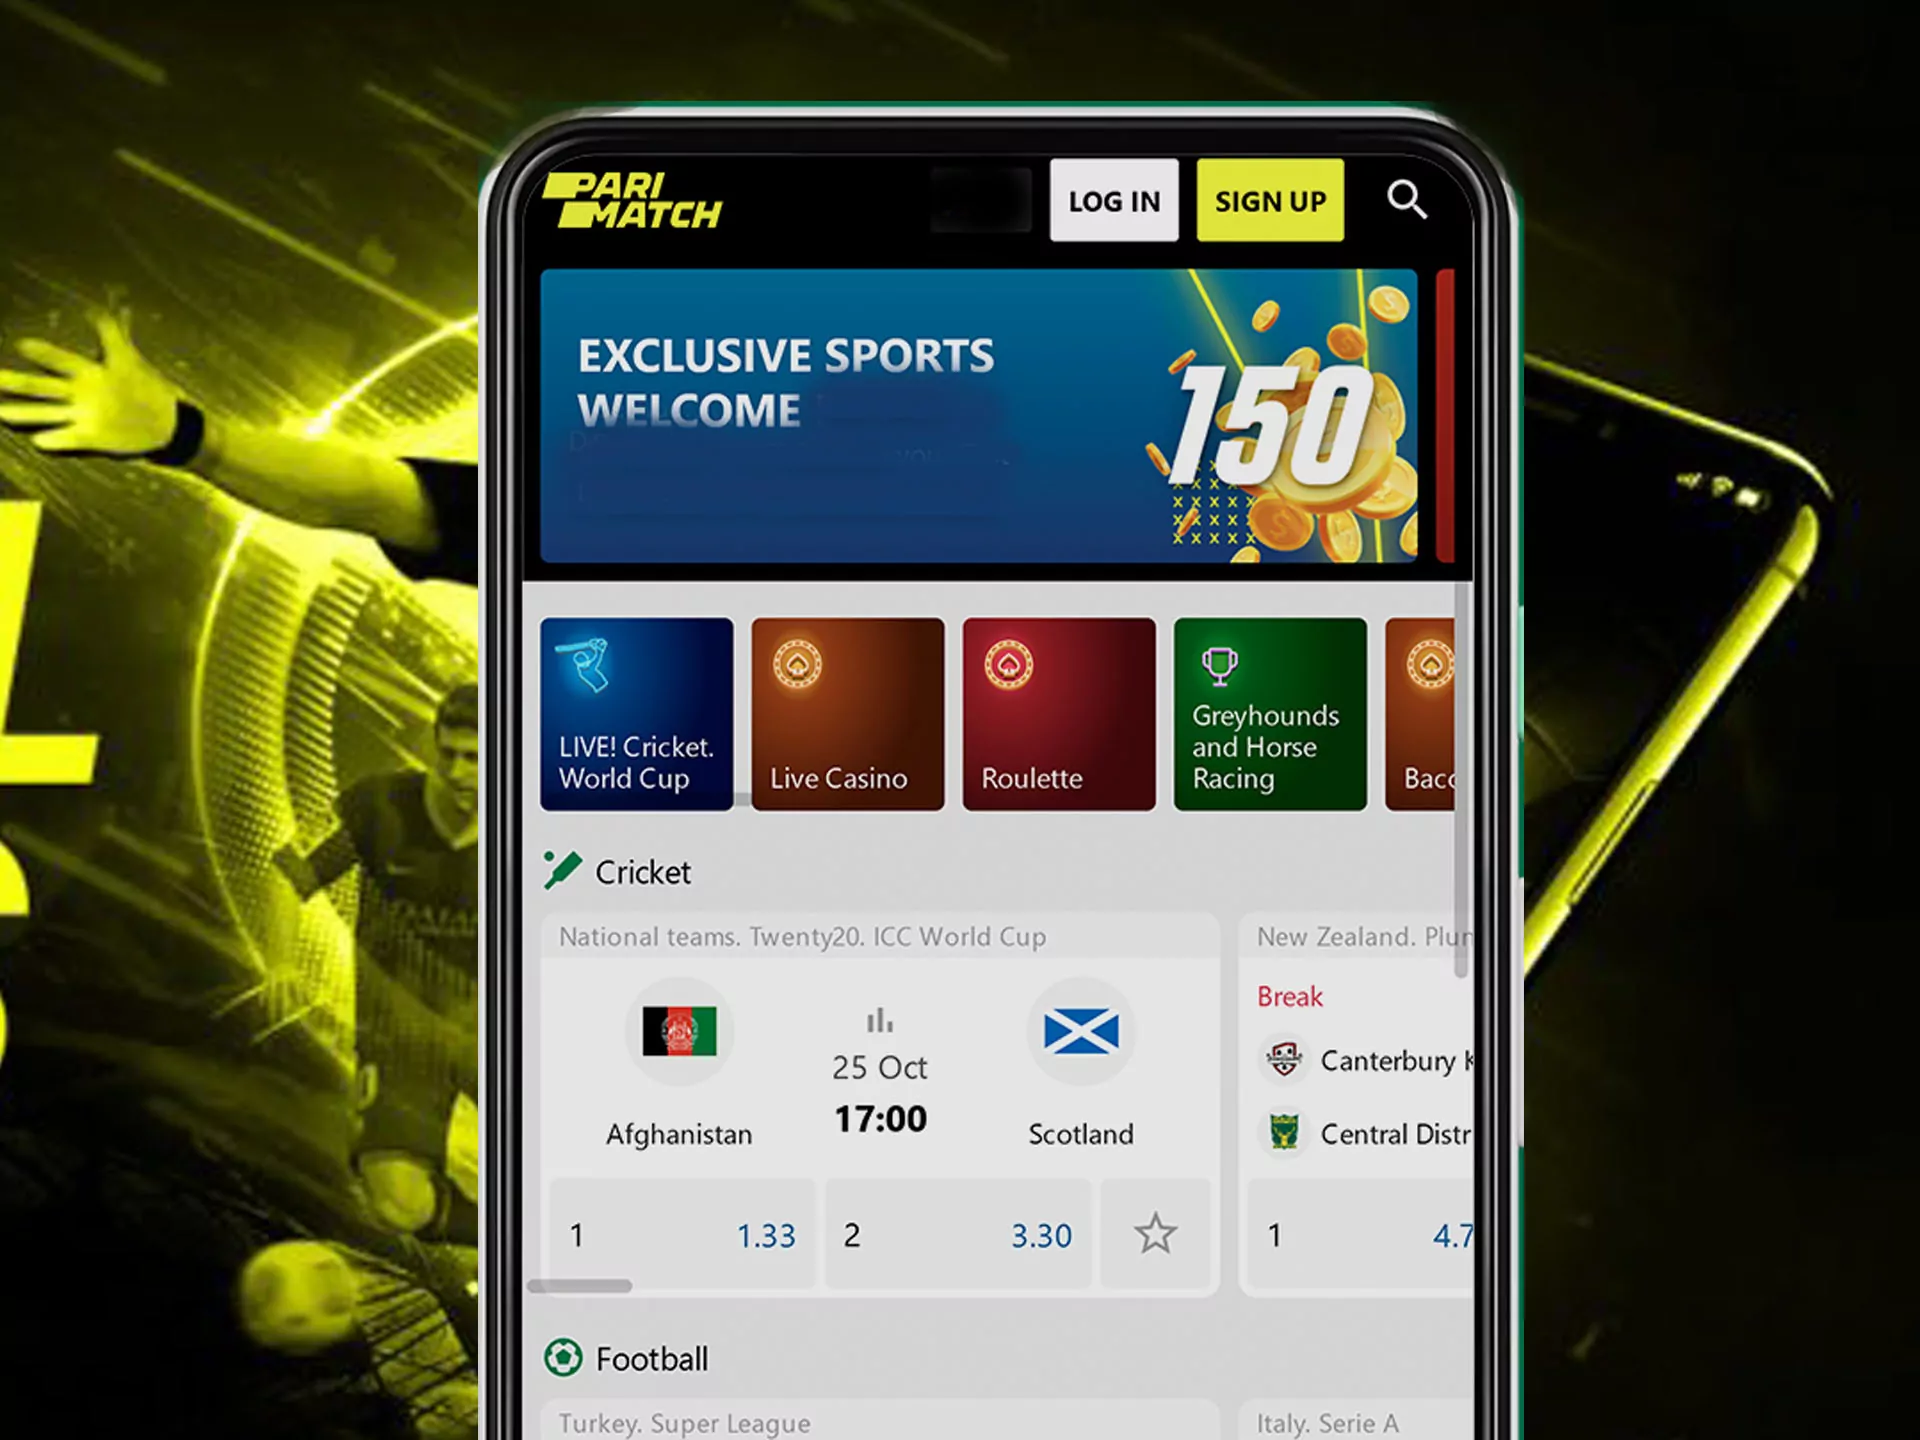 Step by step instruction on how to place a bet with Parimatch App.